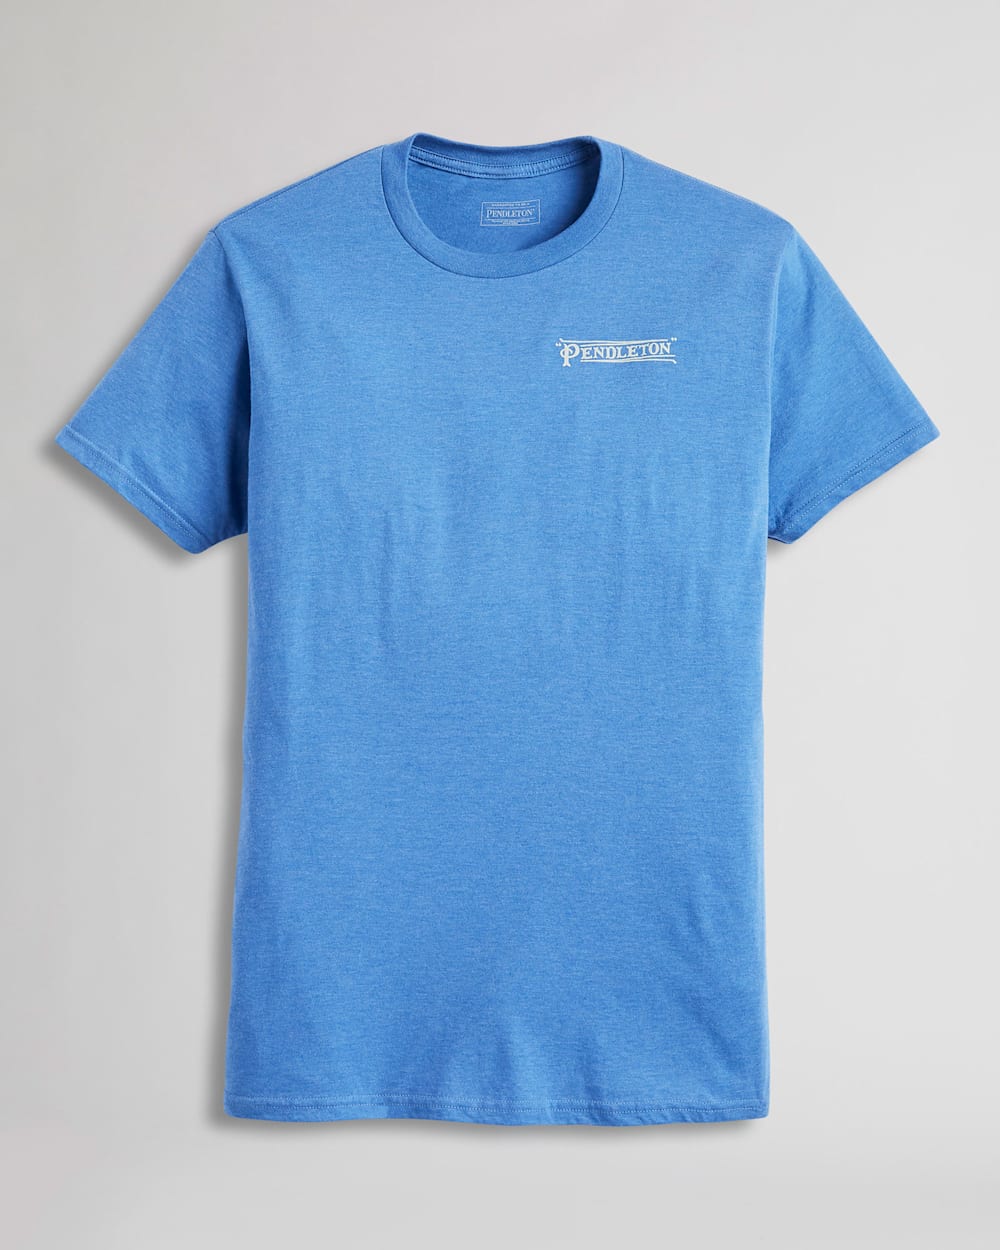 ALTERNATE VIEW OF MEN'S DIAMOND STRIPES GRAPHIC TEE IN ELECTRIC BLUE HEATHER image number 6